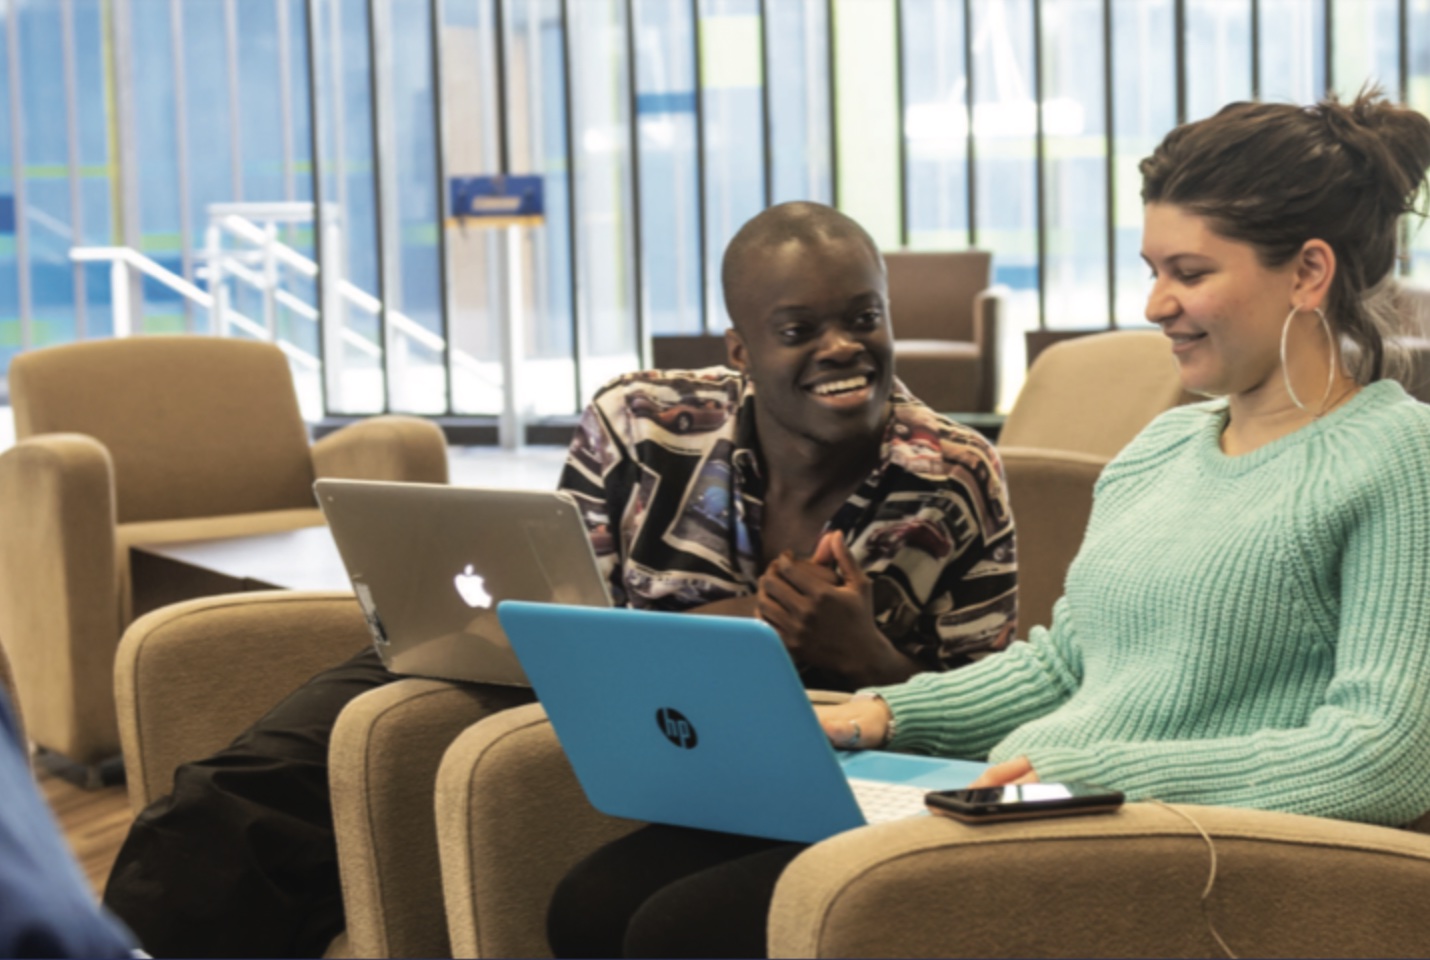 Two students working together on laptops in a communal lounge on campus